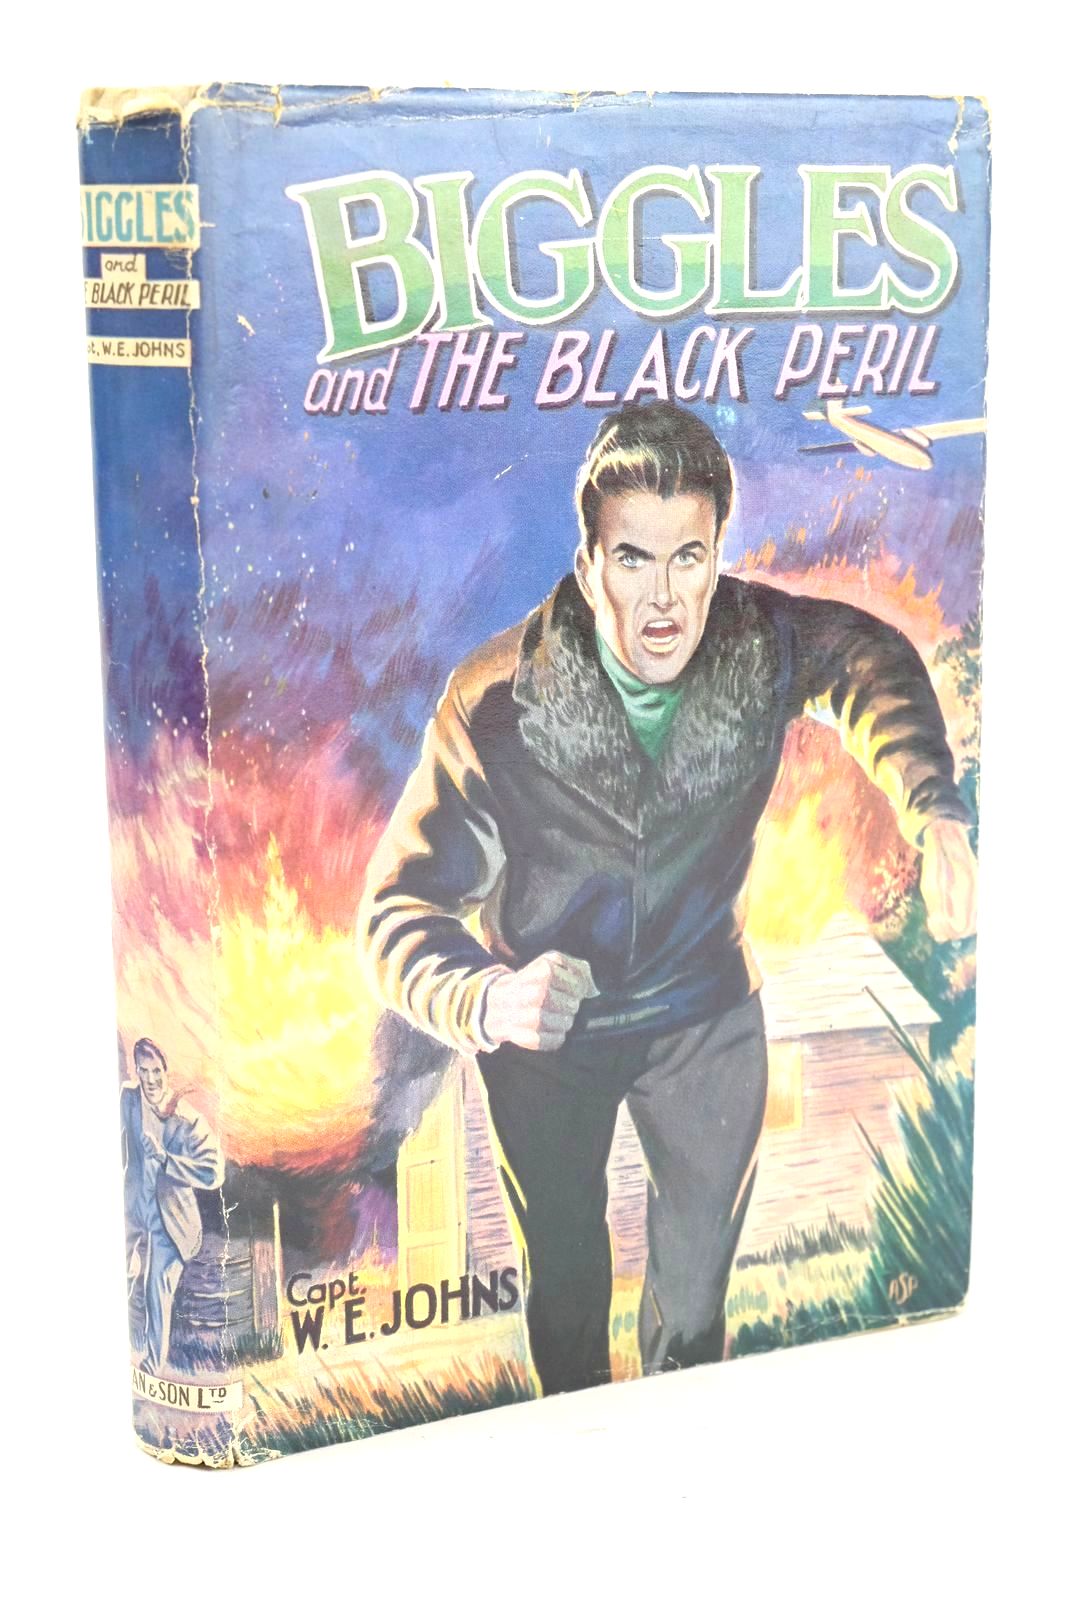 Photo of BIGGLES AND THE BLACK PERIL written by Johns, W.E. published by Dean &amp; Son Ltd. (STOCK CODE: 1326071)  for sale by Stella & Rose's Books